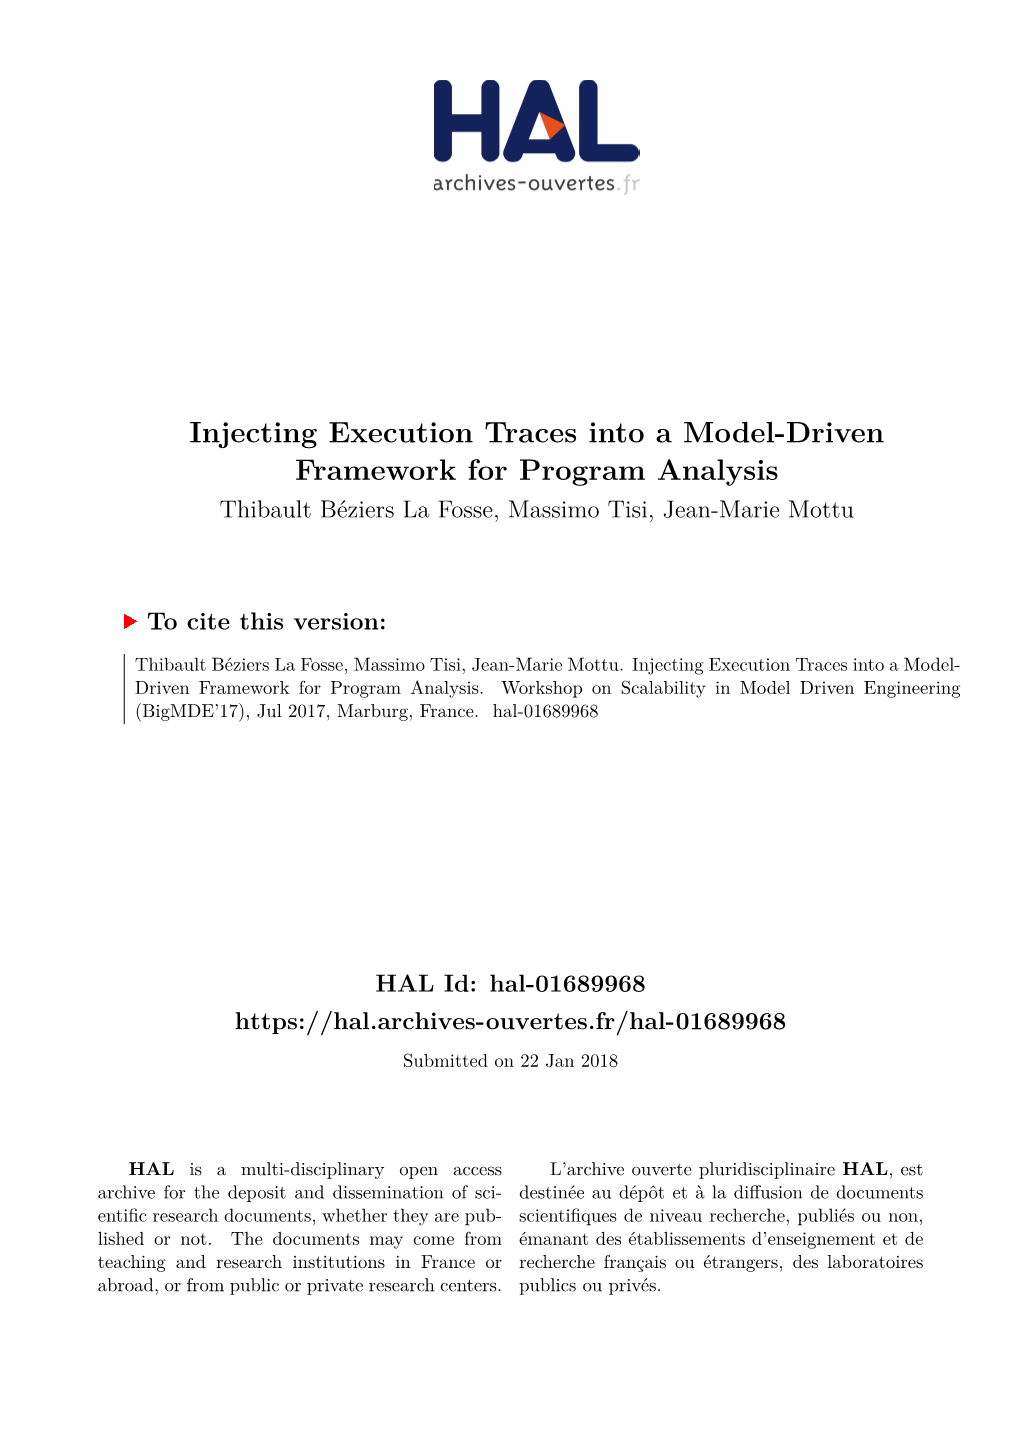 Injecting Execution Traces Into a Model-Driven Framework for Program Analysis Thibault Béziers La Fosse, Massimo Tisi, Jean-Marie Mottu